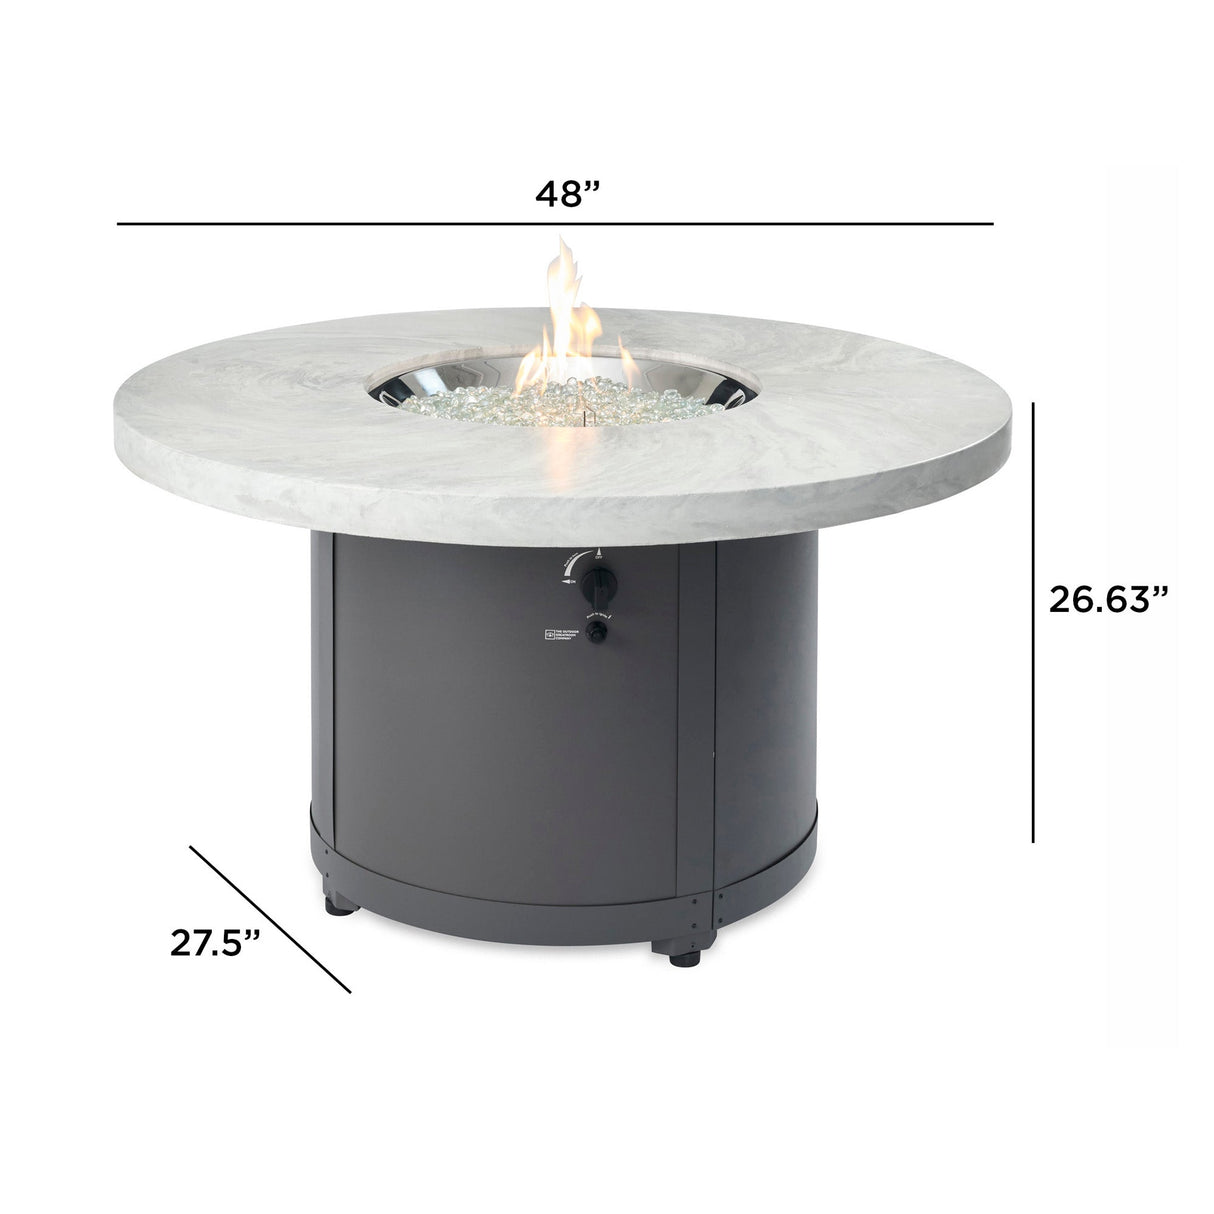 Dimensions overlaid on the White Onyx Beacon Round Gas Fire Pit Table